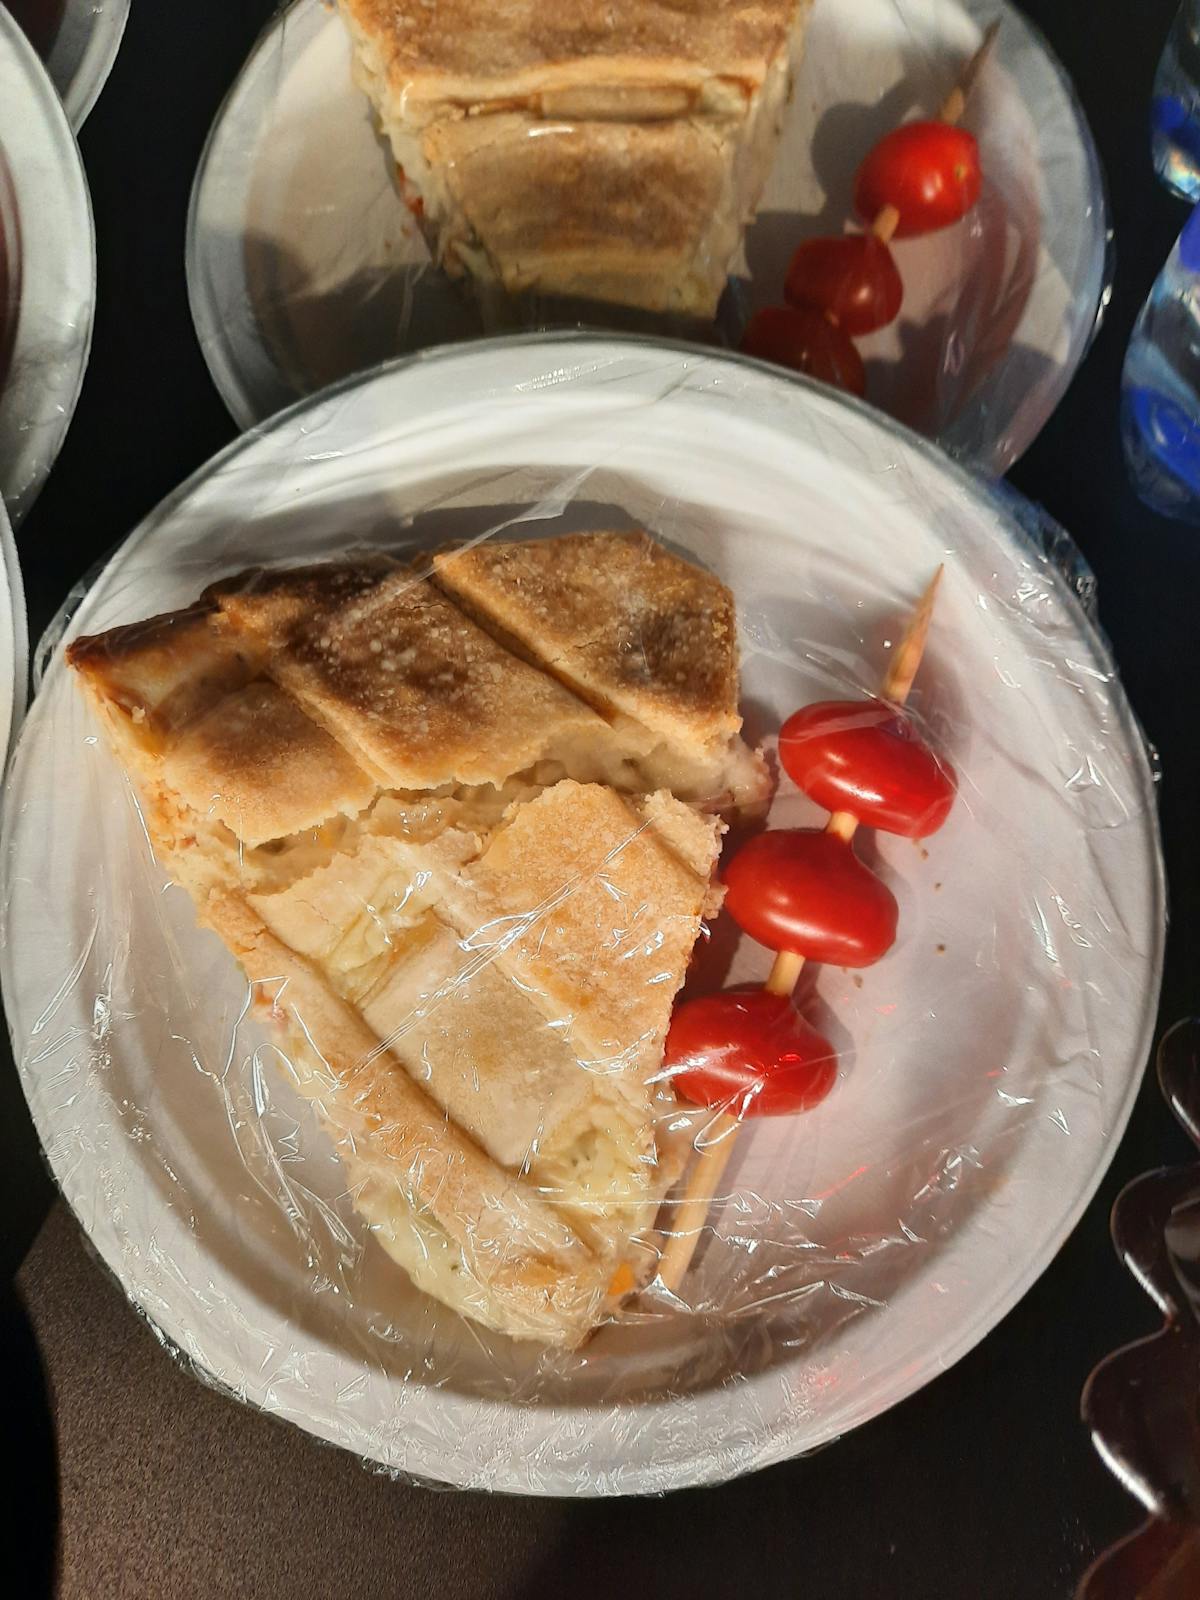 a plate of food with a slice of bread